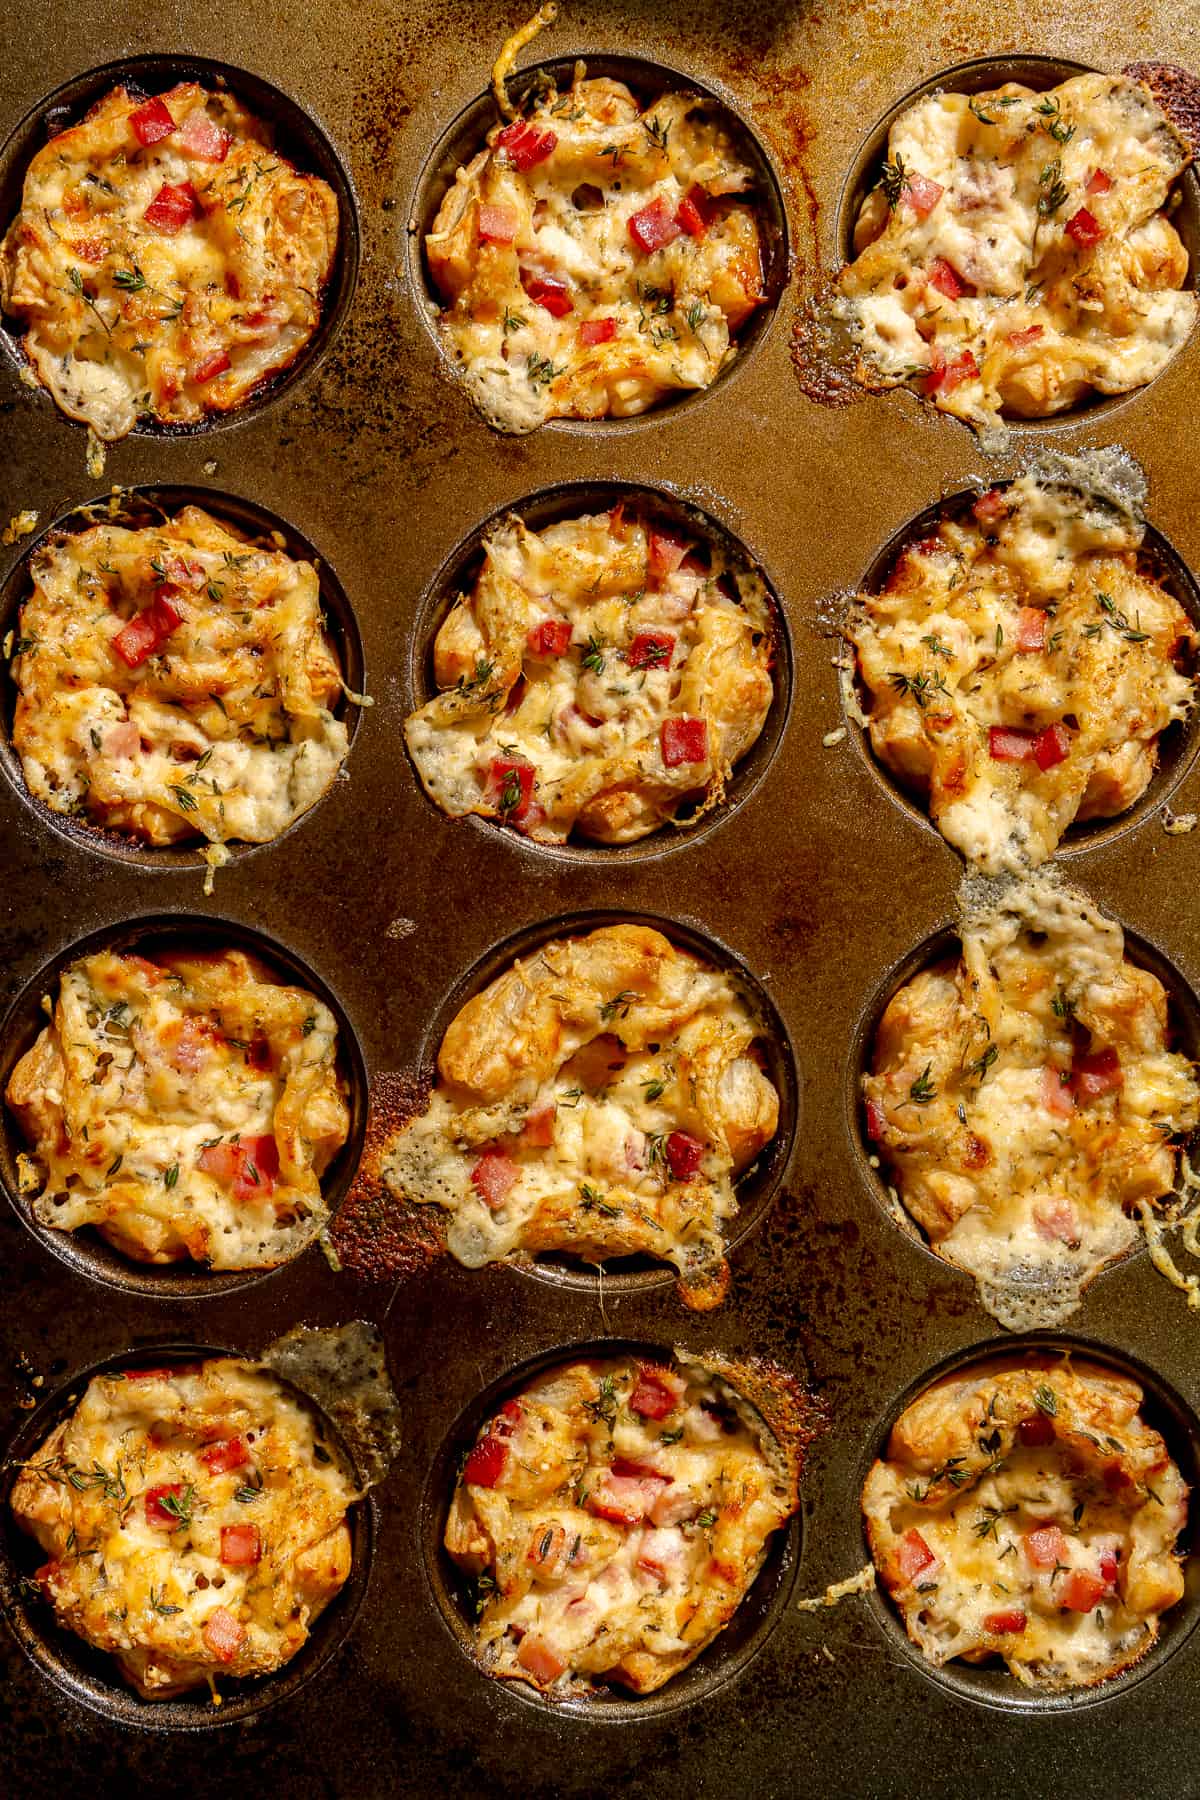 Baked Mini Croque Monsieur Bites in muffin tins.